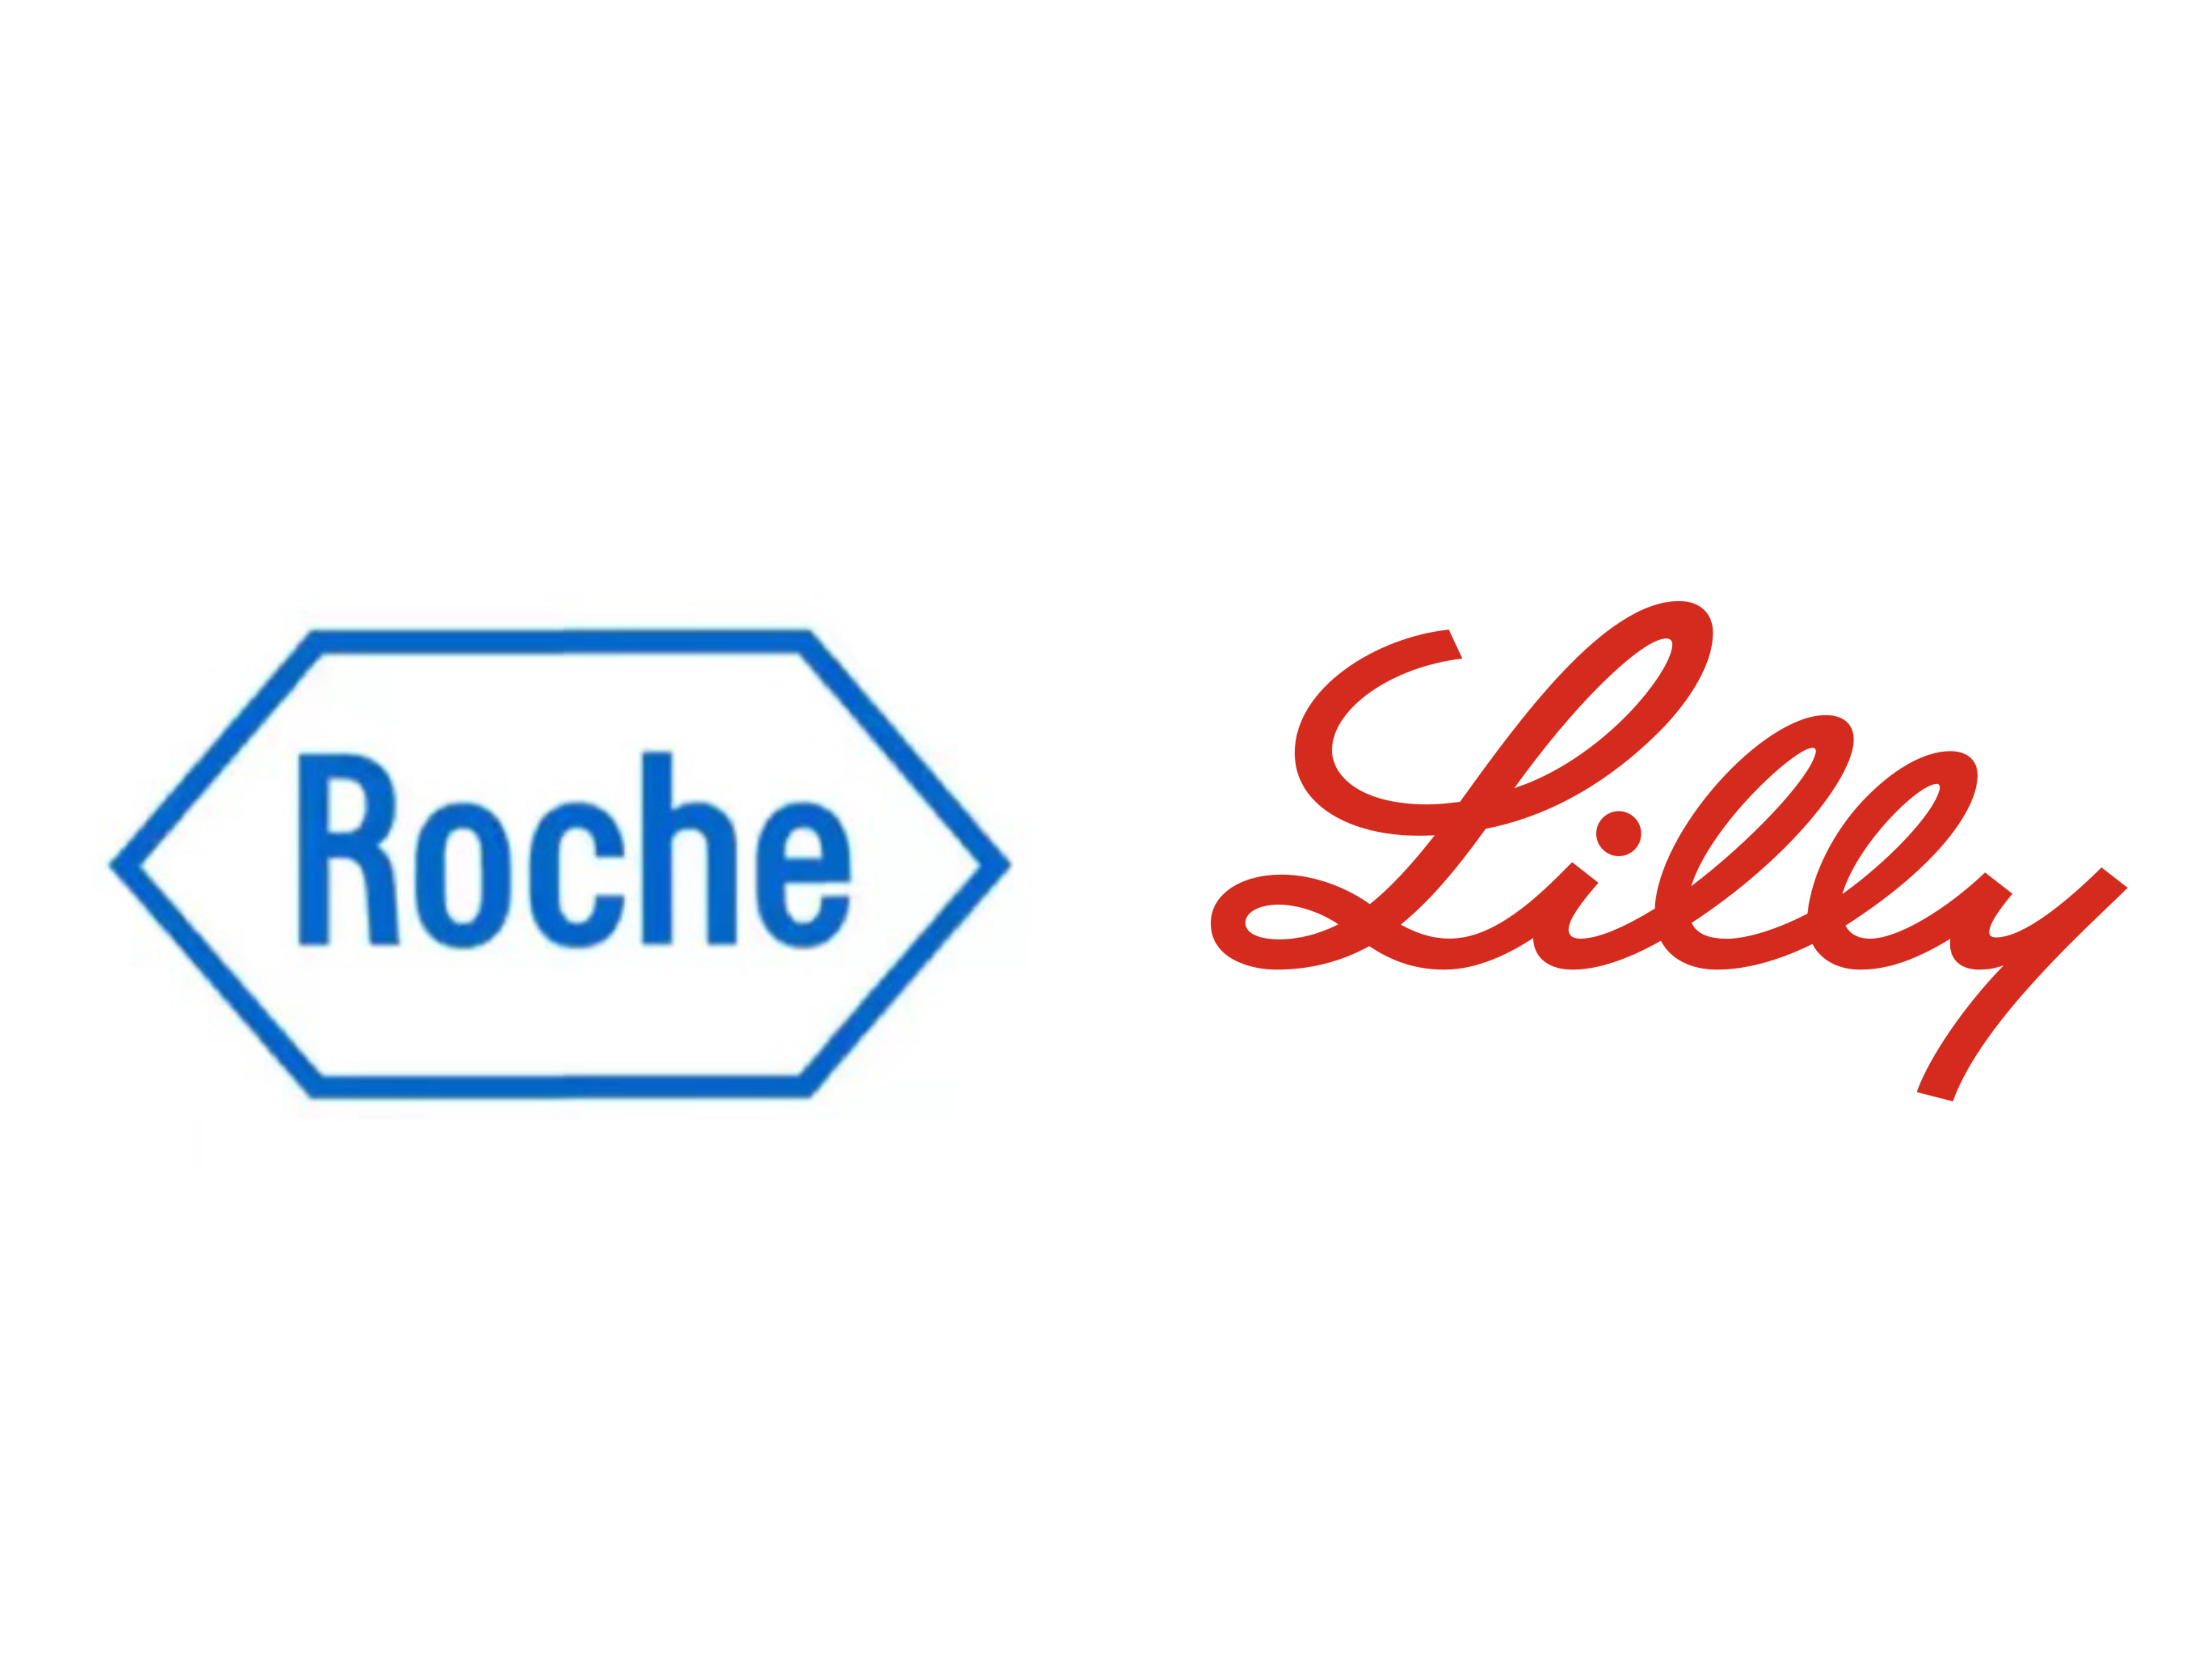 Roche, Eli Lilly Collaborate on Blood Test to Aid Early Diagnosis of Alzheimer's